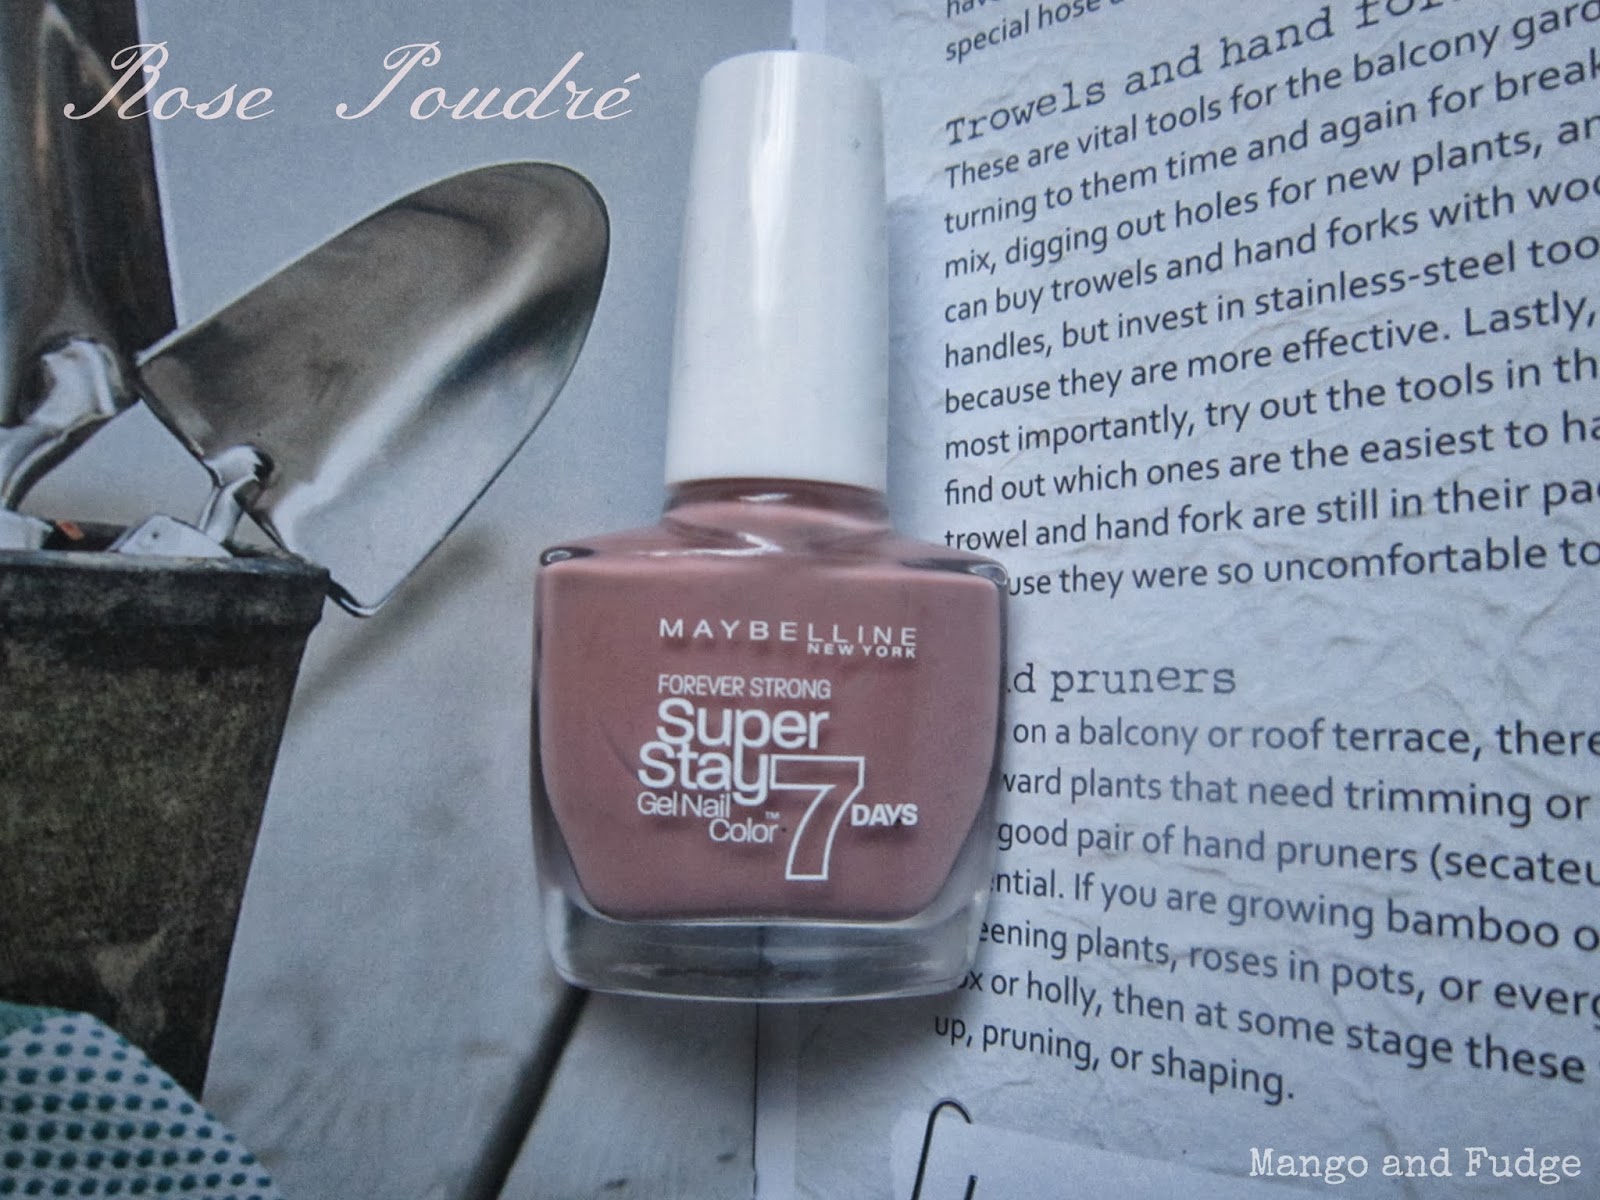 Mango and Fudge: Maybelline Forever Strong SuperStay 7 days Gel Nail Color  in Rose Poudre  first thoughts + other stuff